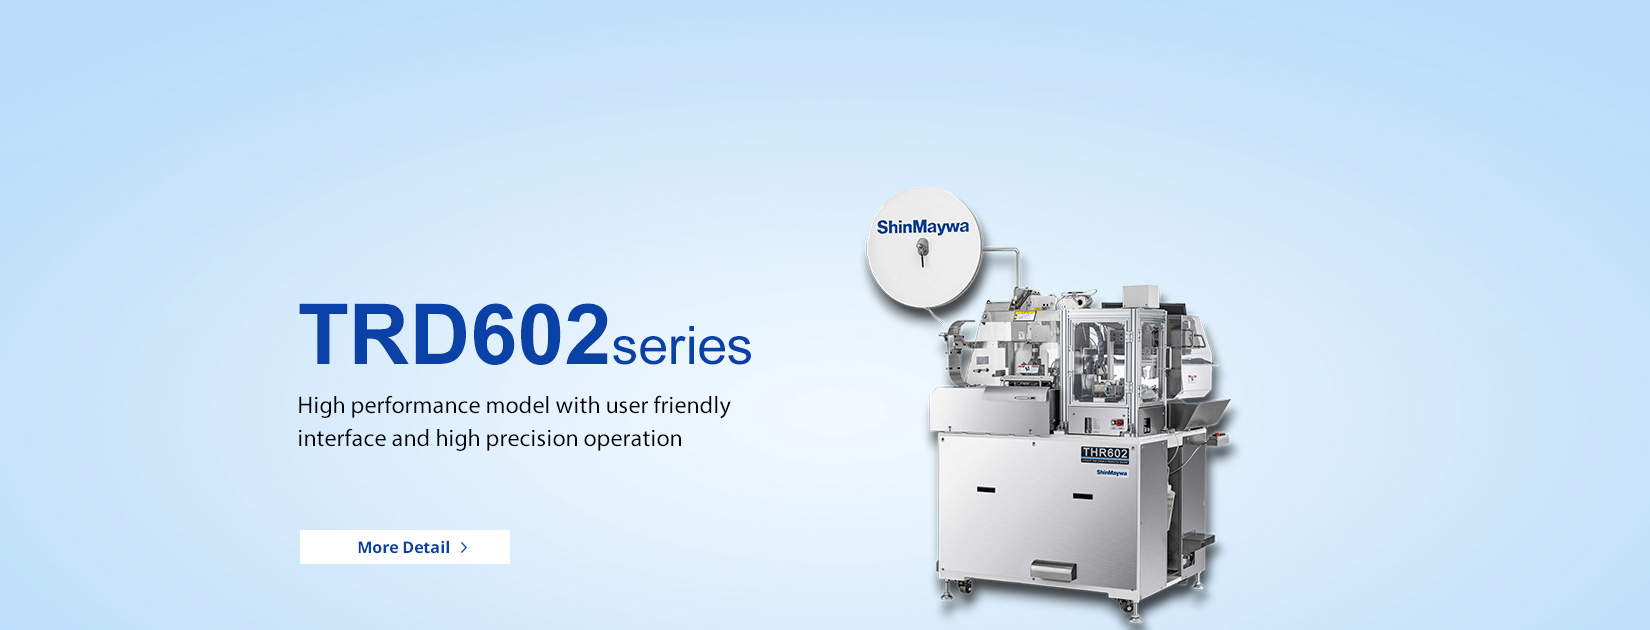 TRD602 series High performance model with user friendly interface and high precision operation